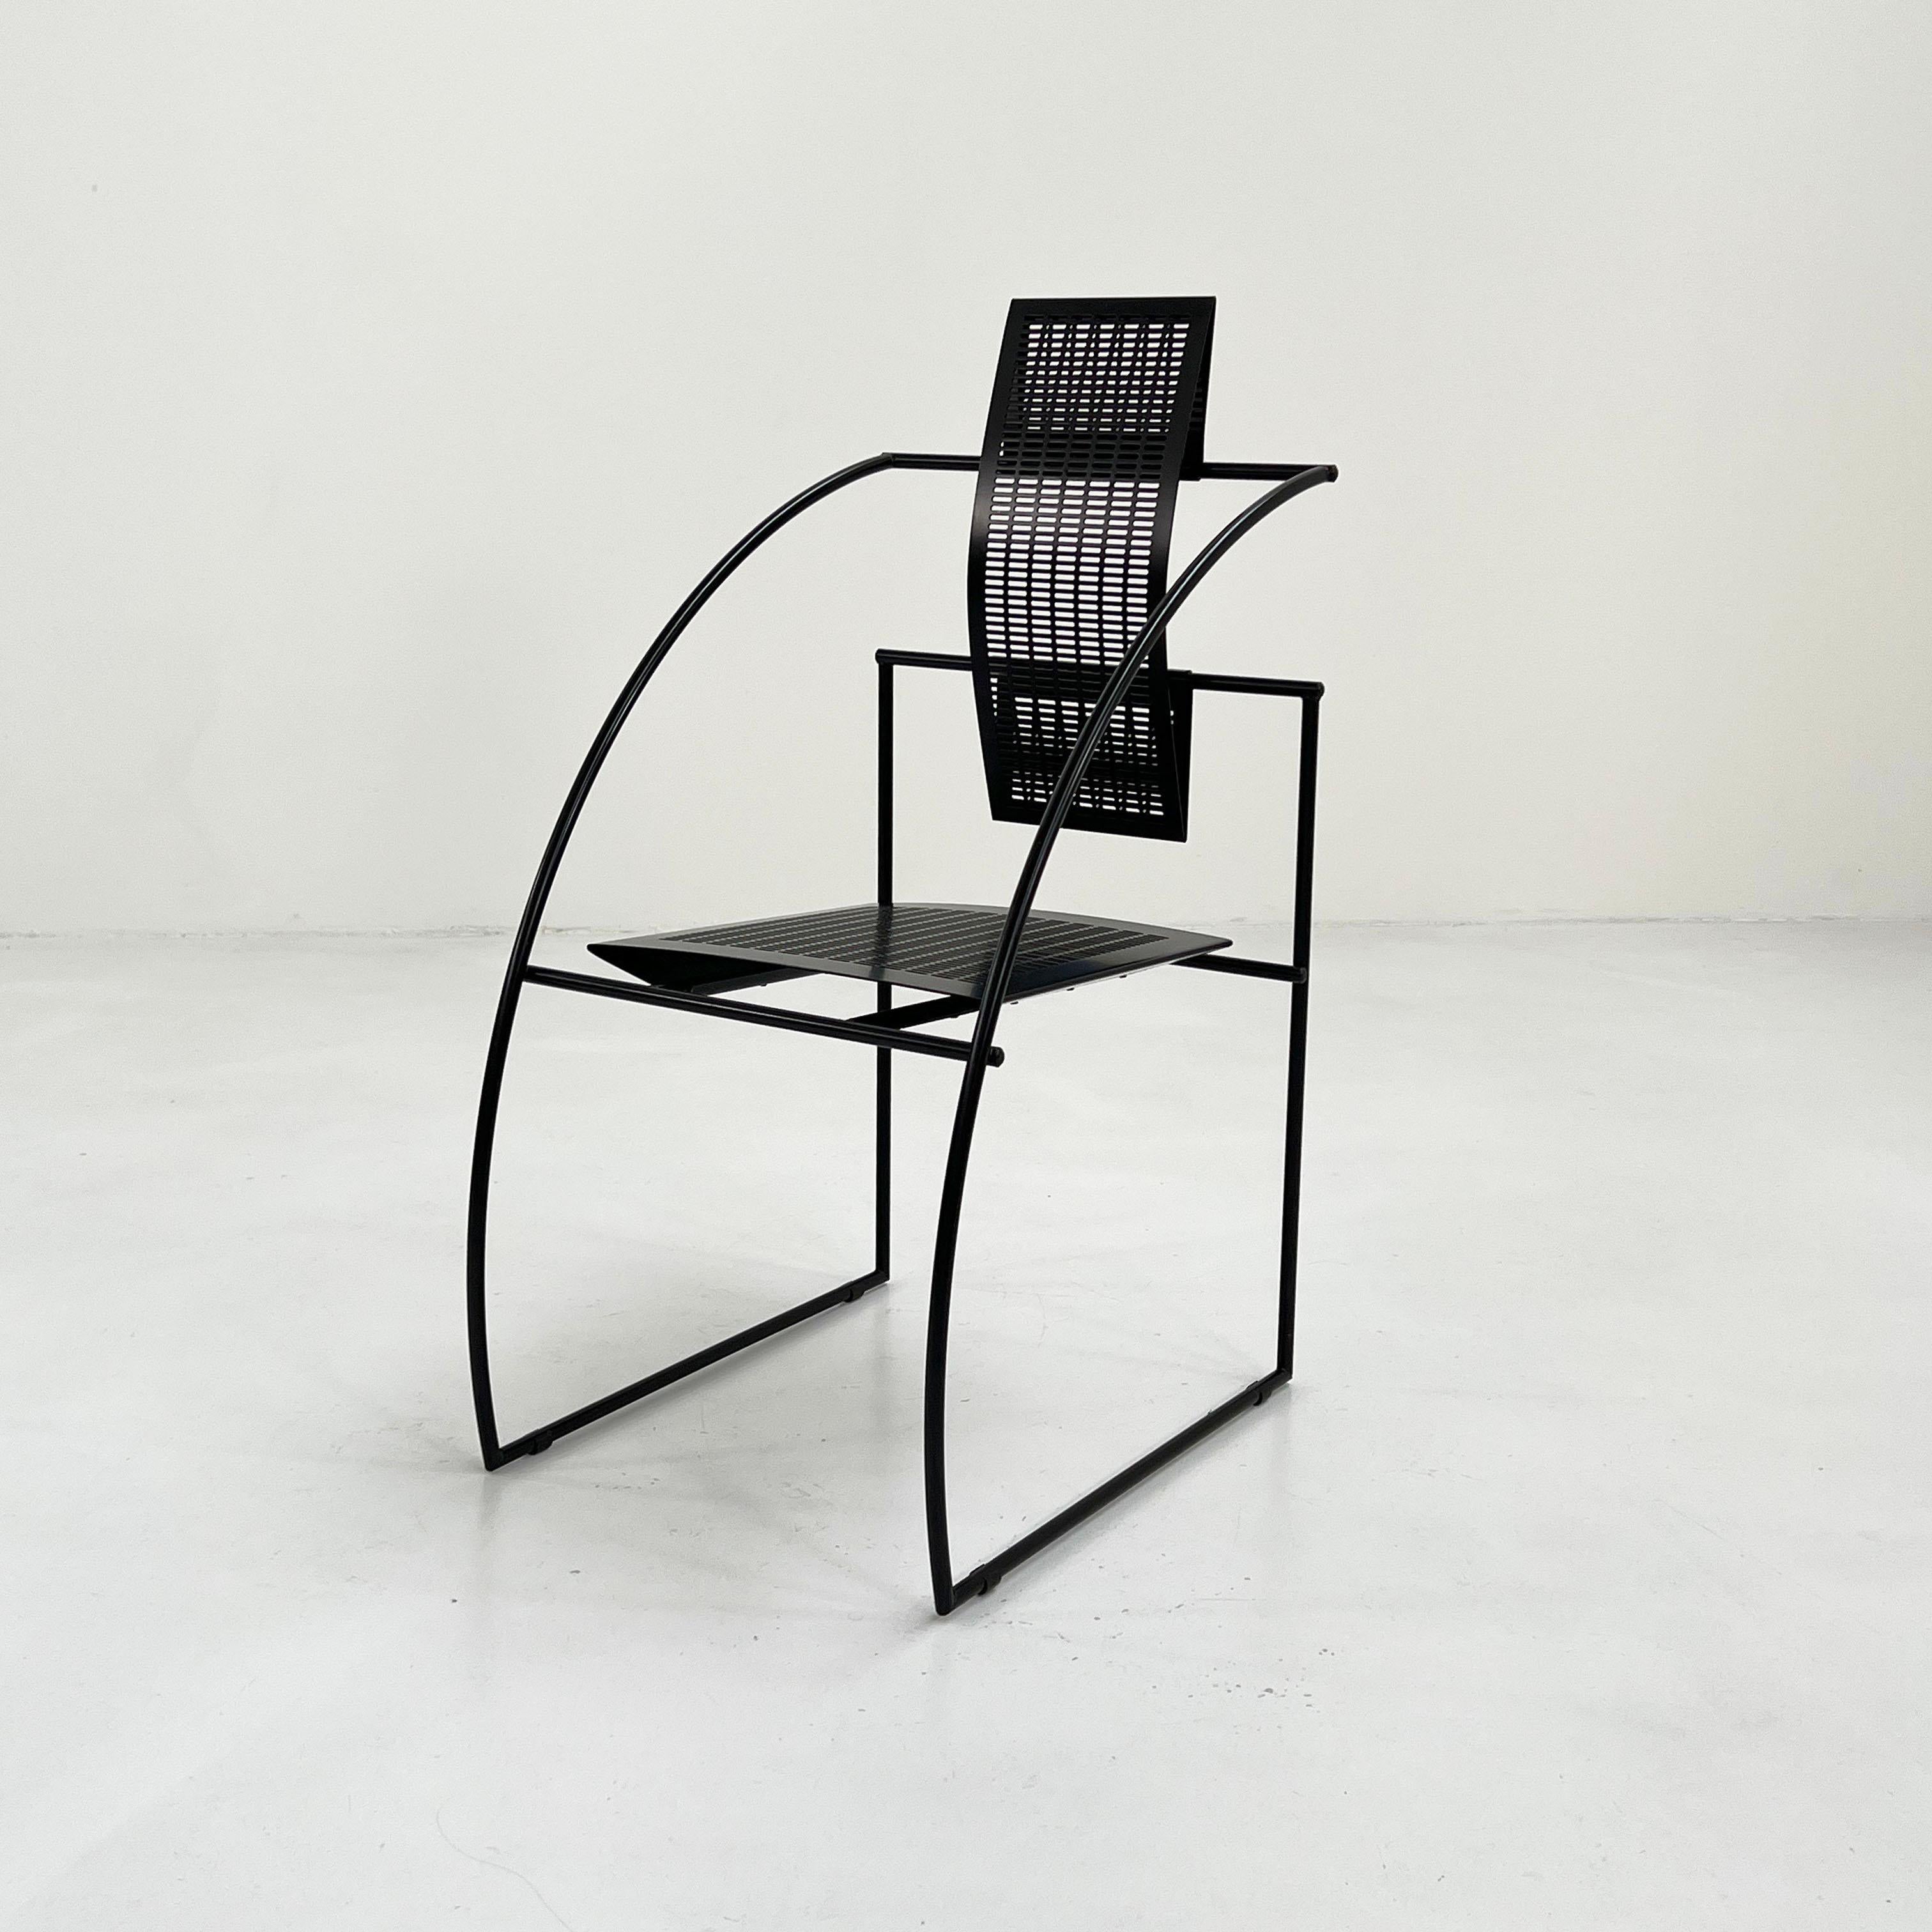 Designer - Mario Botta
Producer - Alias
Model - Quinta Chair
Design Period - Eighties
Measurements - Width 43 cm x Depth 55 cm x Height 94 cm x Seat Height 43 cm
Materials - Metal
Color - Black
Light wear consistent with age and use. Some light